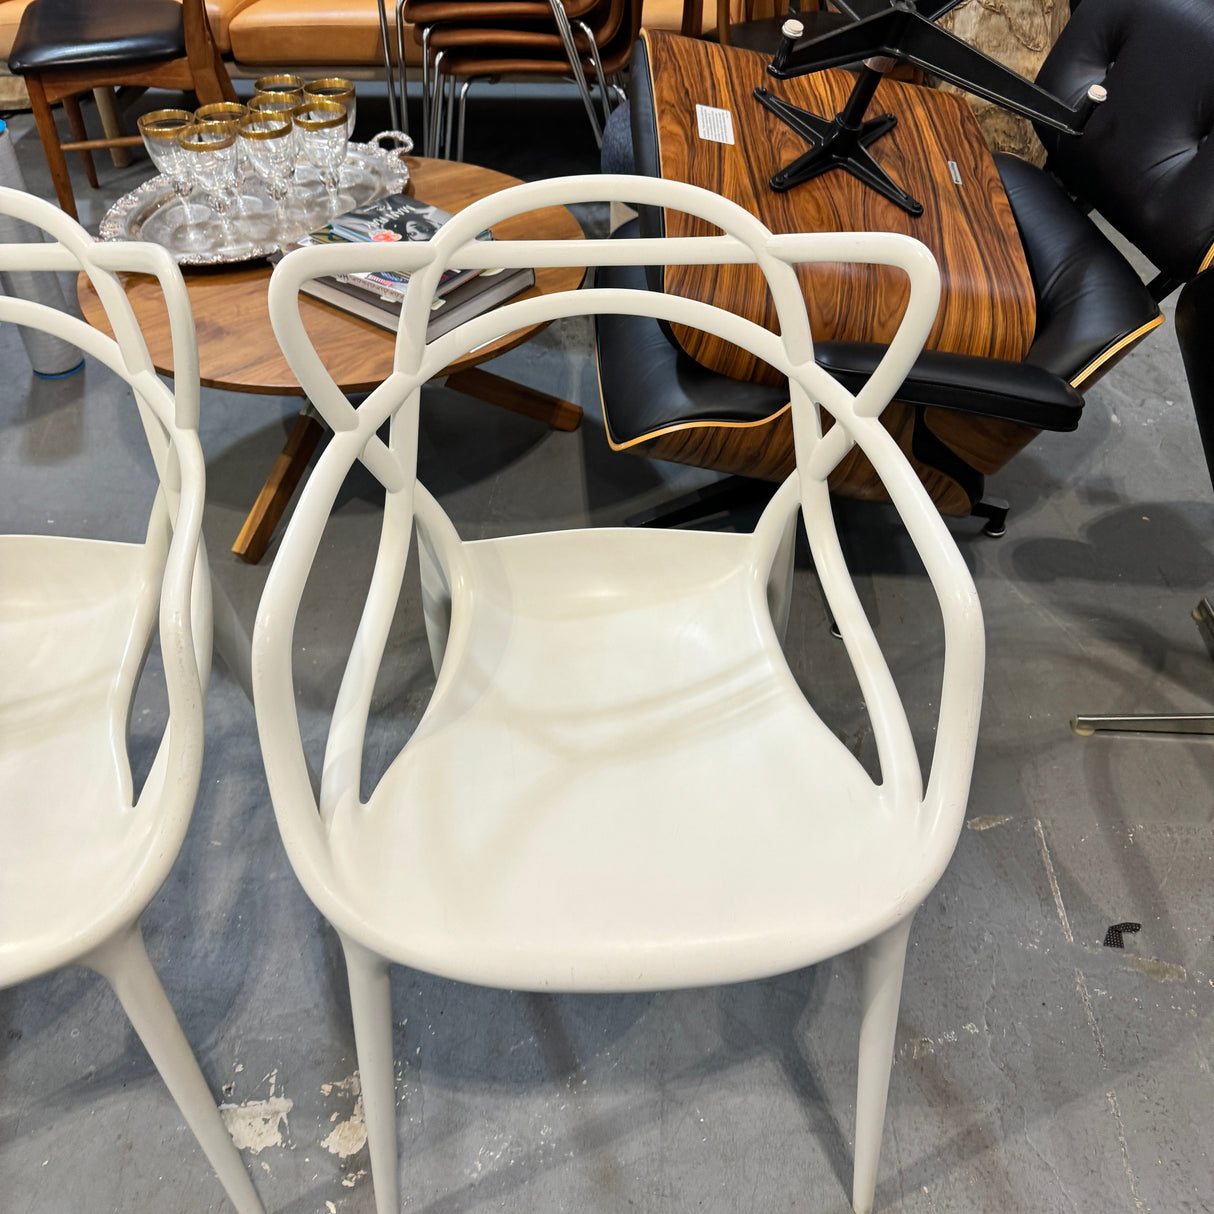 Authentic Philippe Starck Kartell Master set of 4 chairs